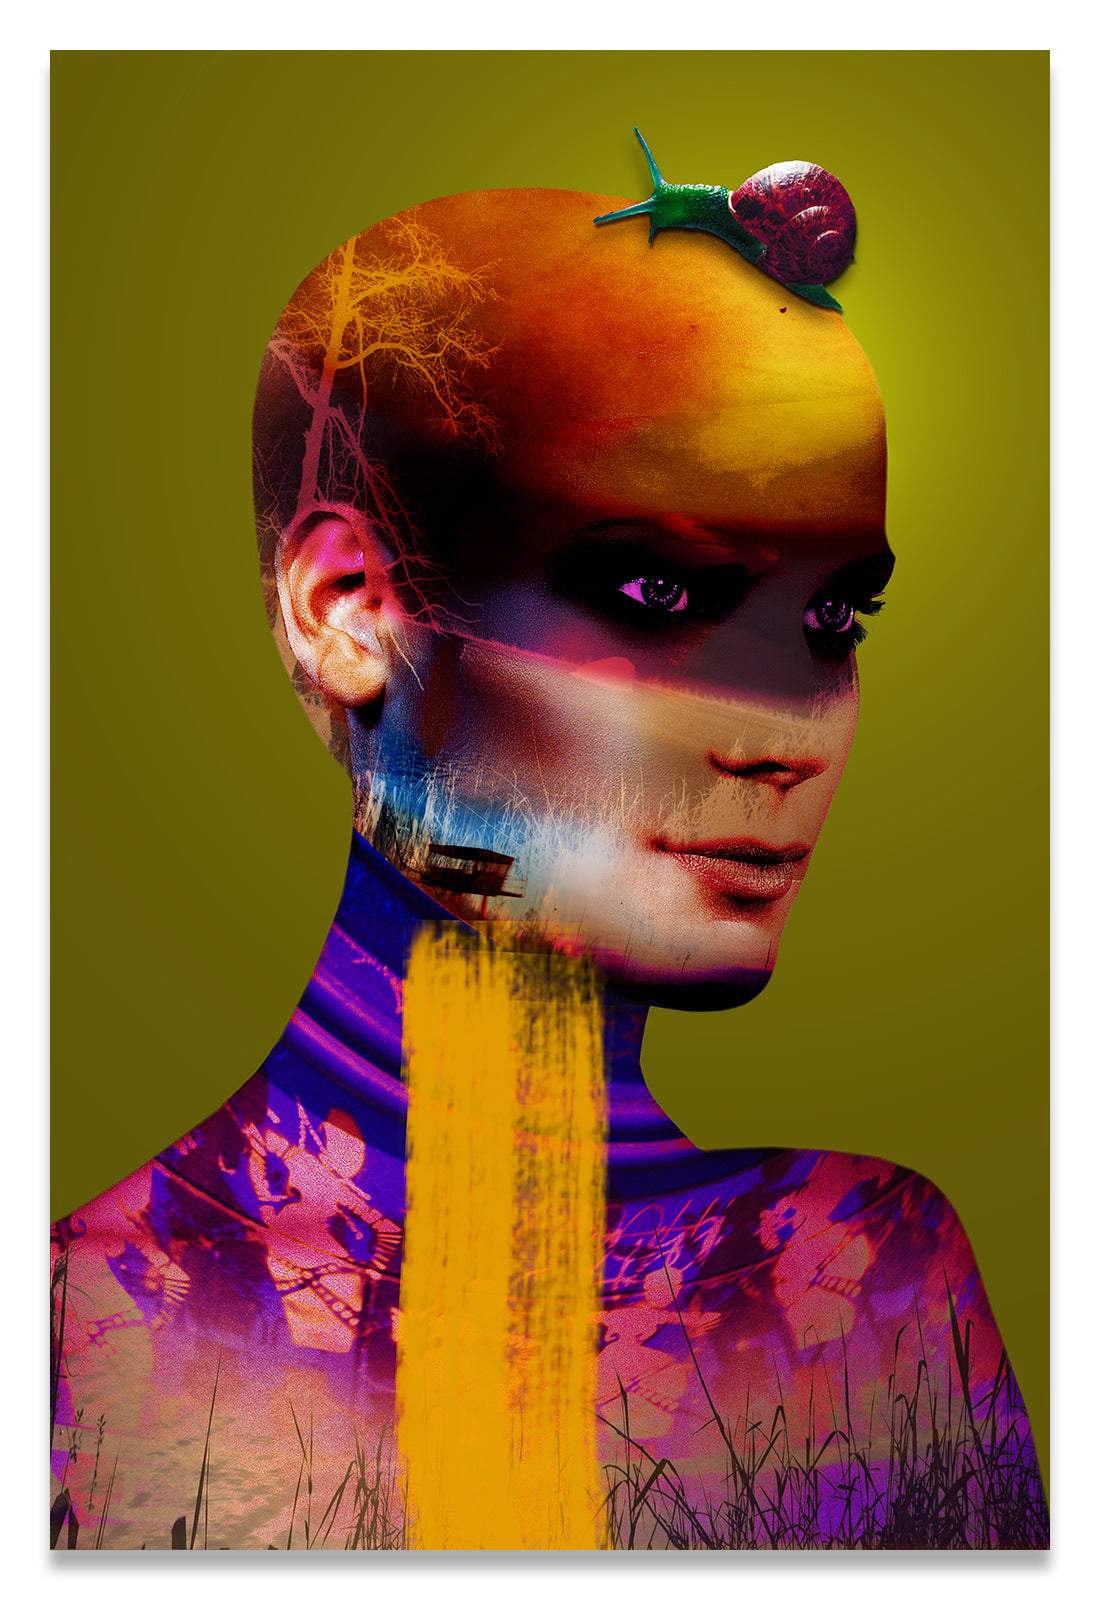 Colorful Chartreuse Surreal Portrait of a Bald Woman with a Snail on her Head.